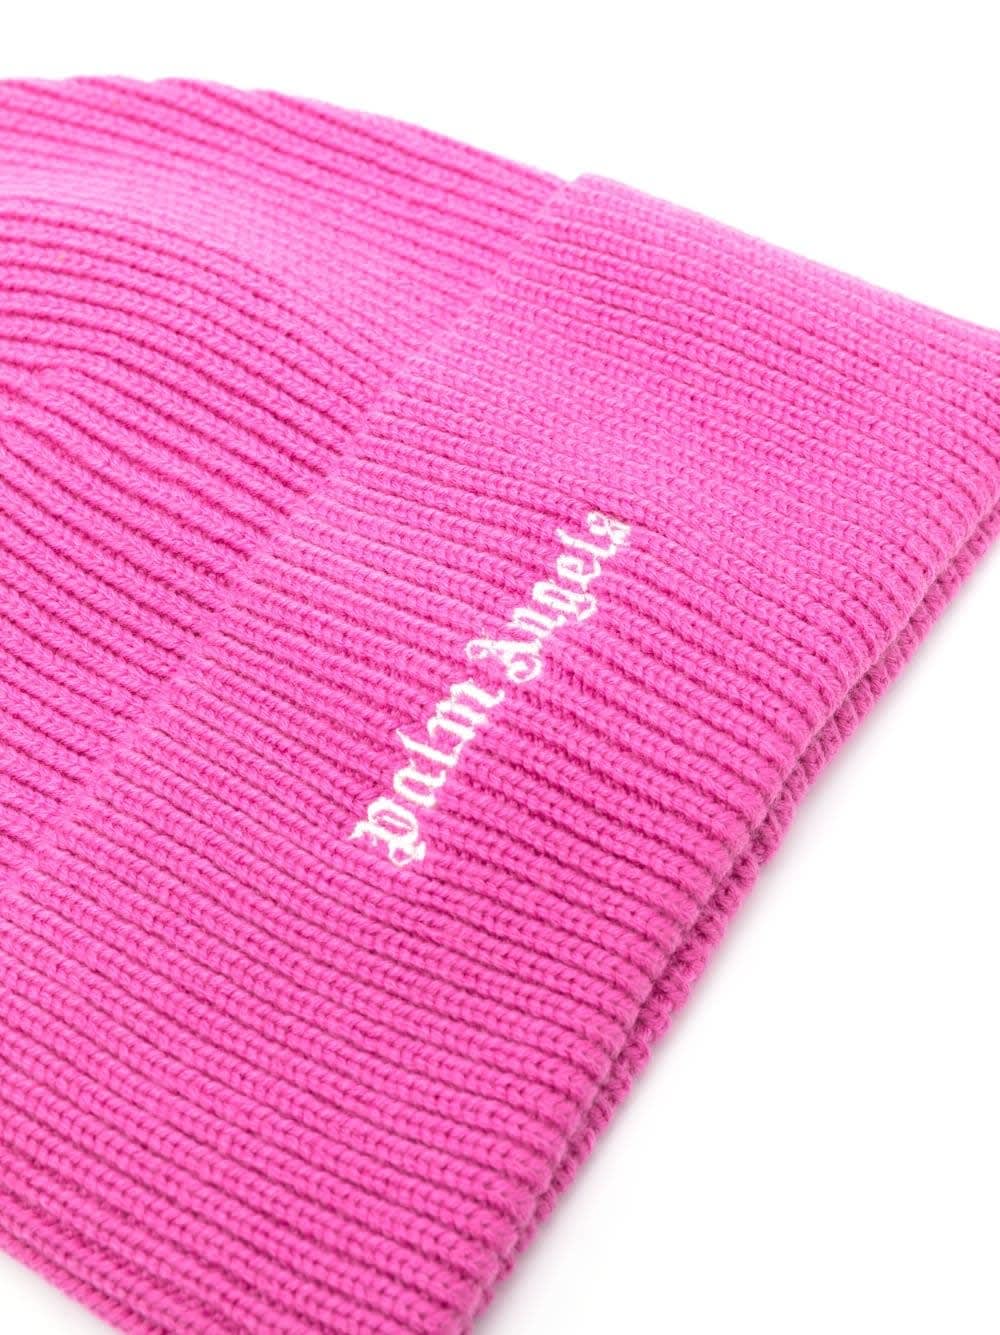 Shop Palm Angels Black Wool Beanie With White Logo In Pink